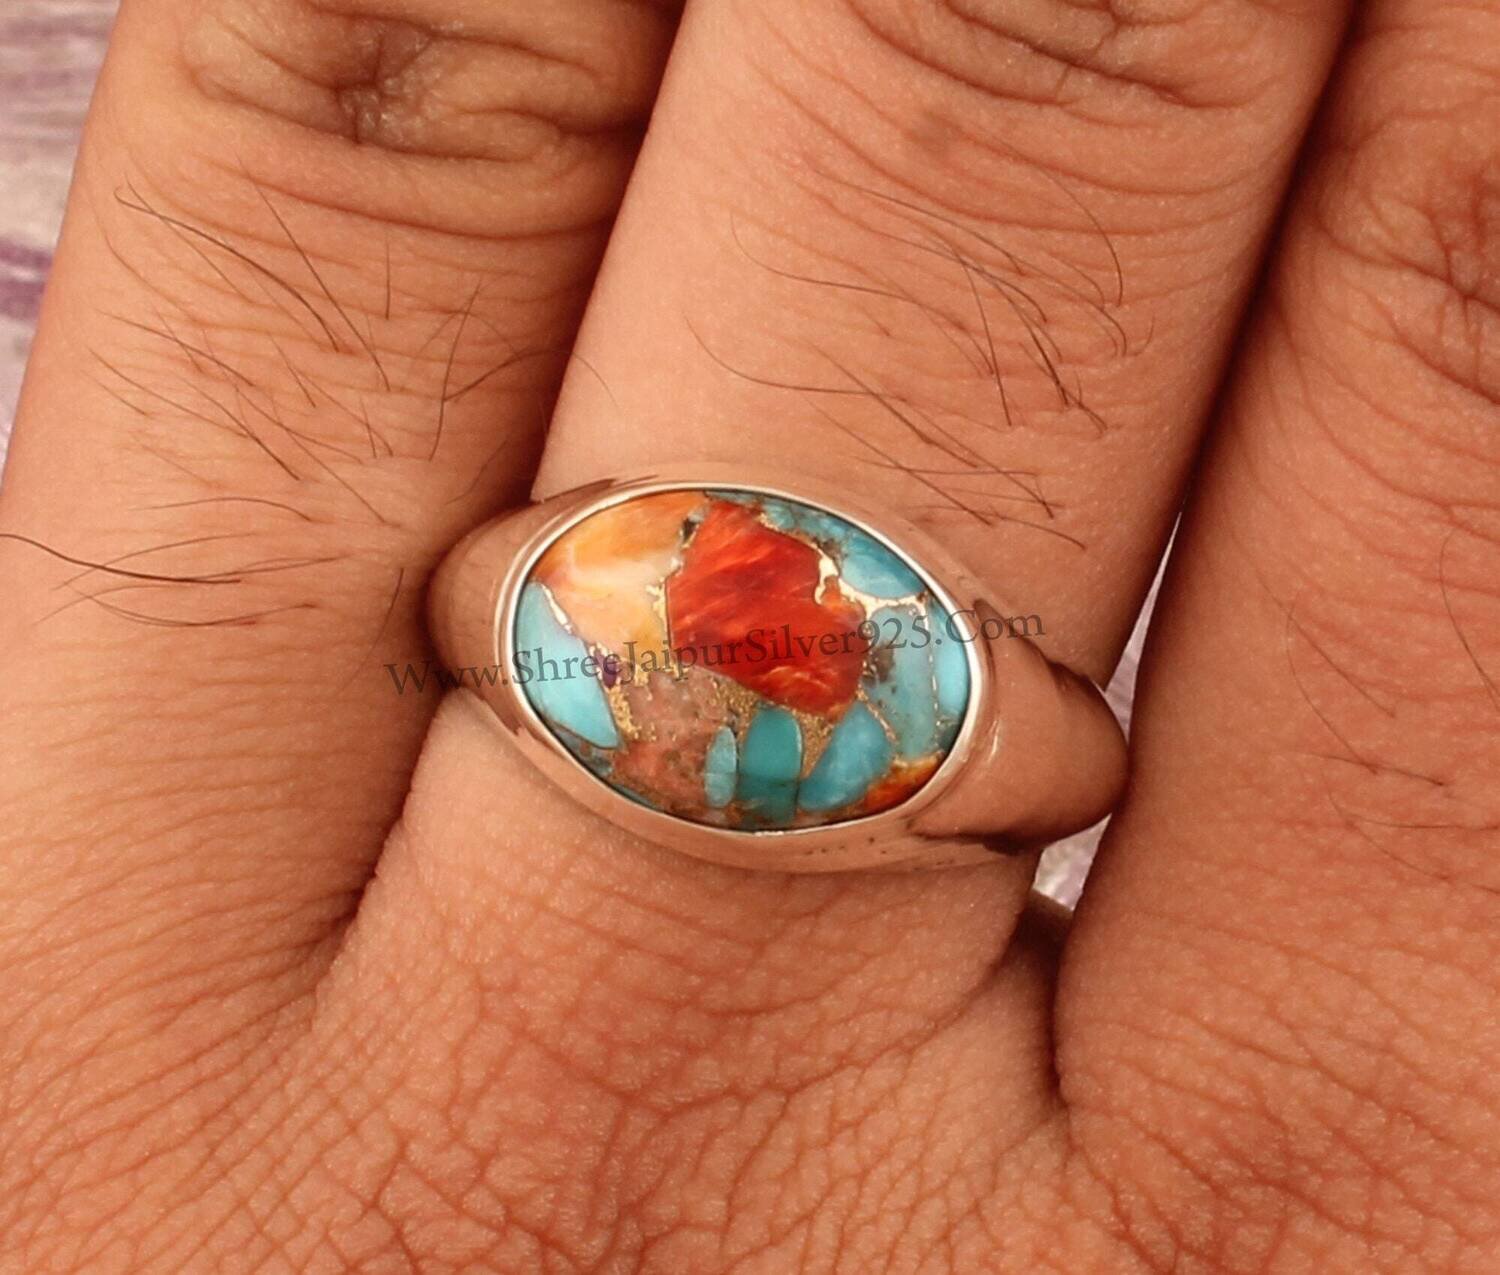 Oyster Copper Turquoise Solid 925 Sterling Silver Ring For Women, Handmade Mix Oyster Oval Stone Ring For Wedding Anniversary Gift For Her